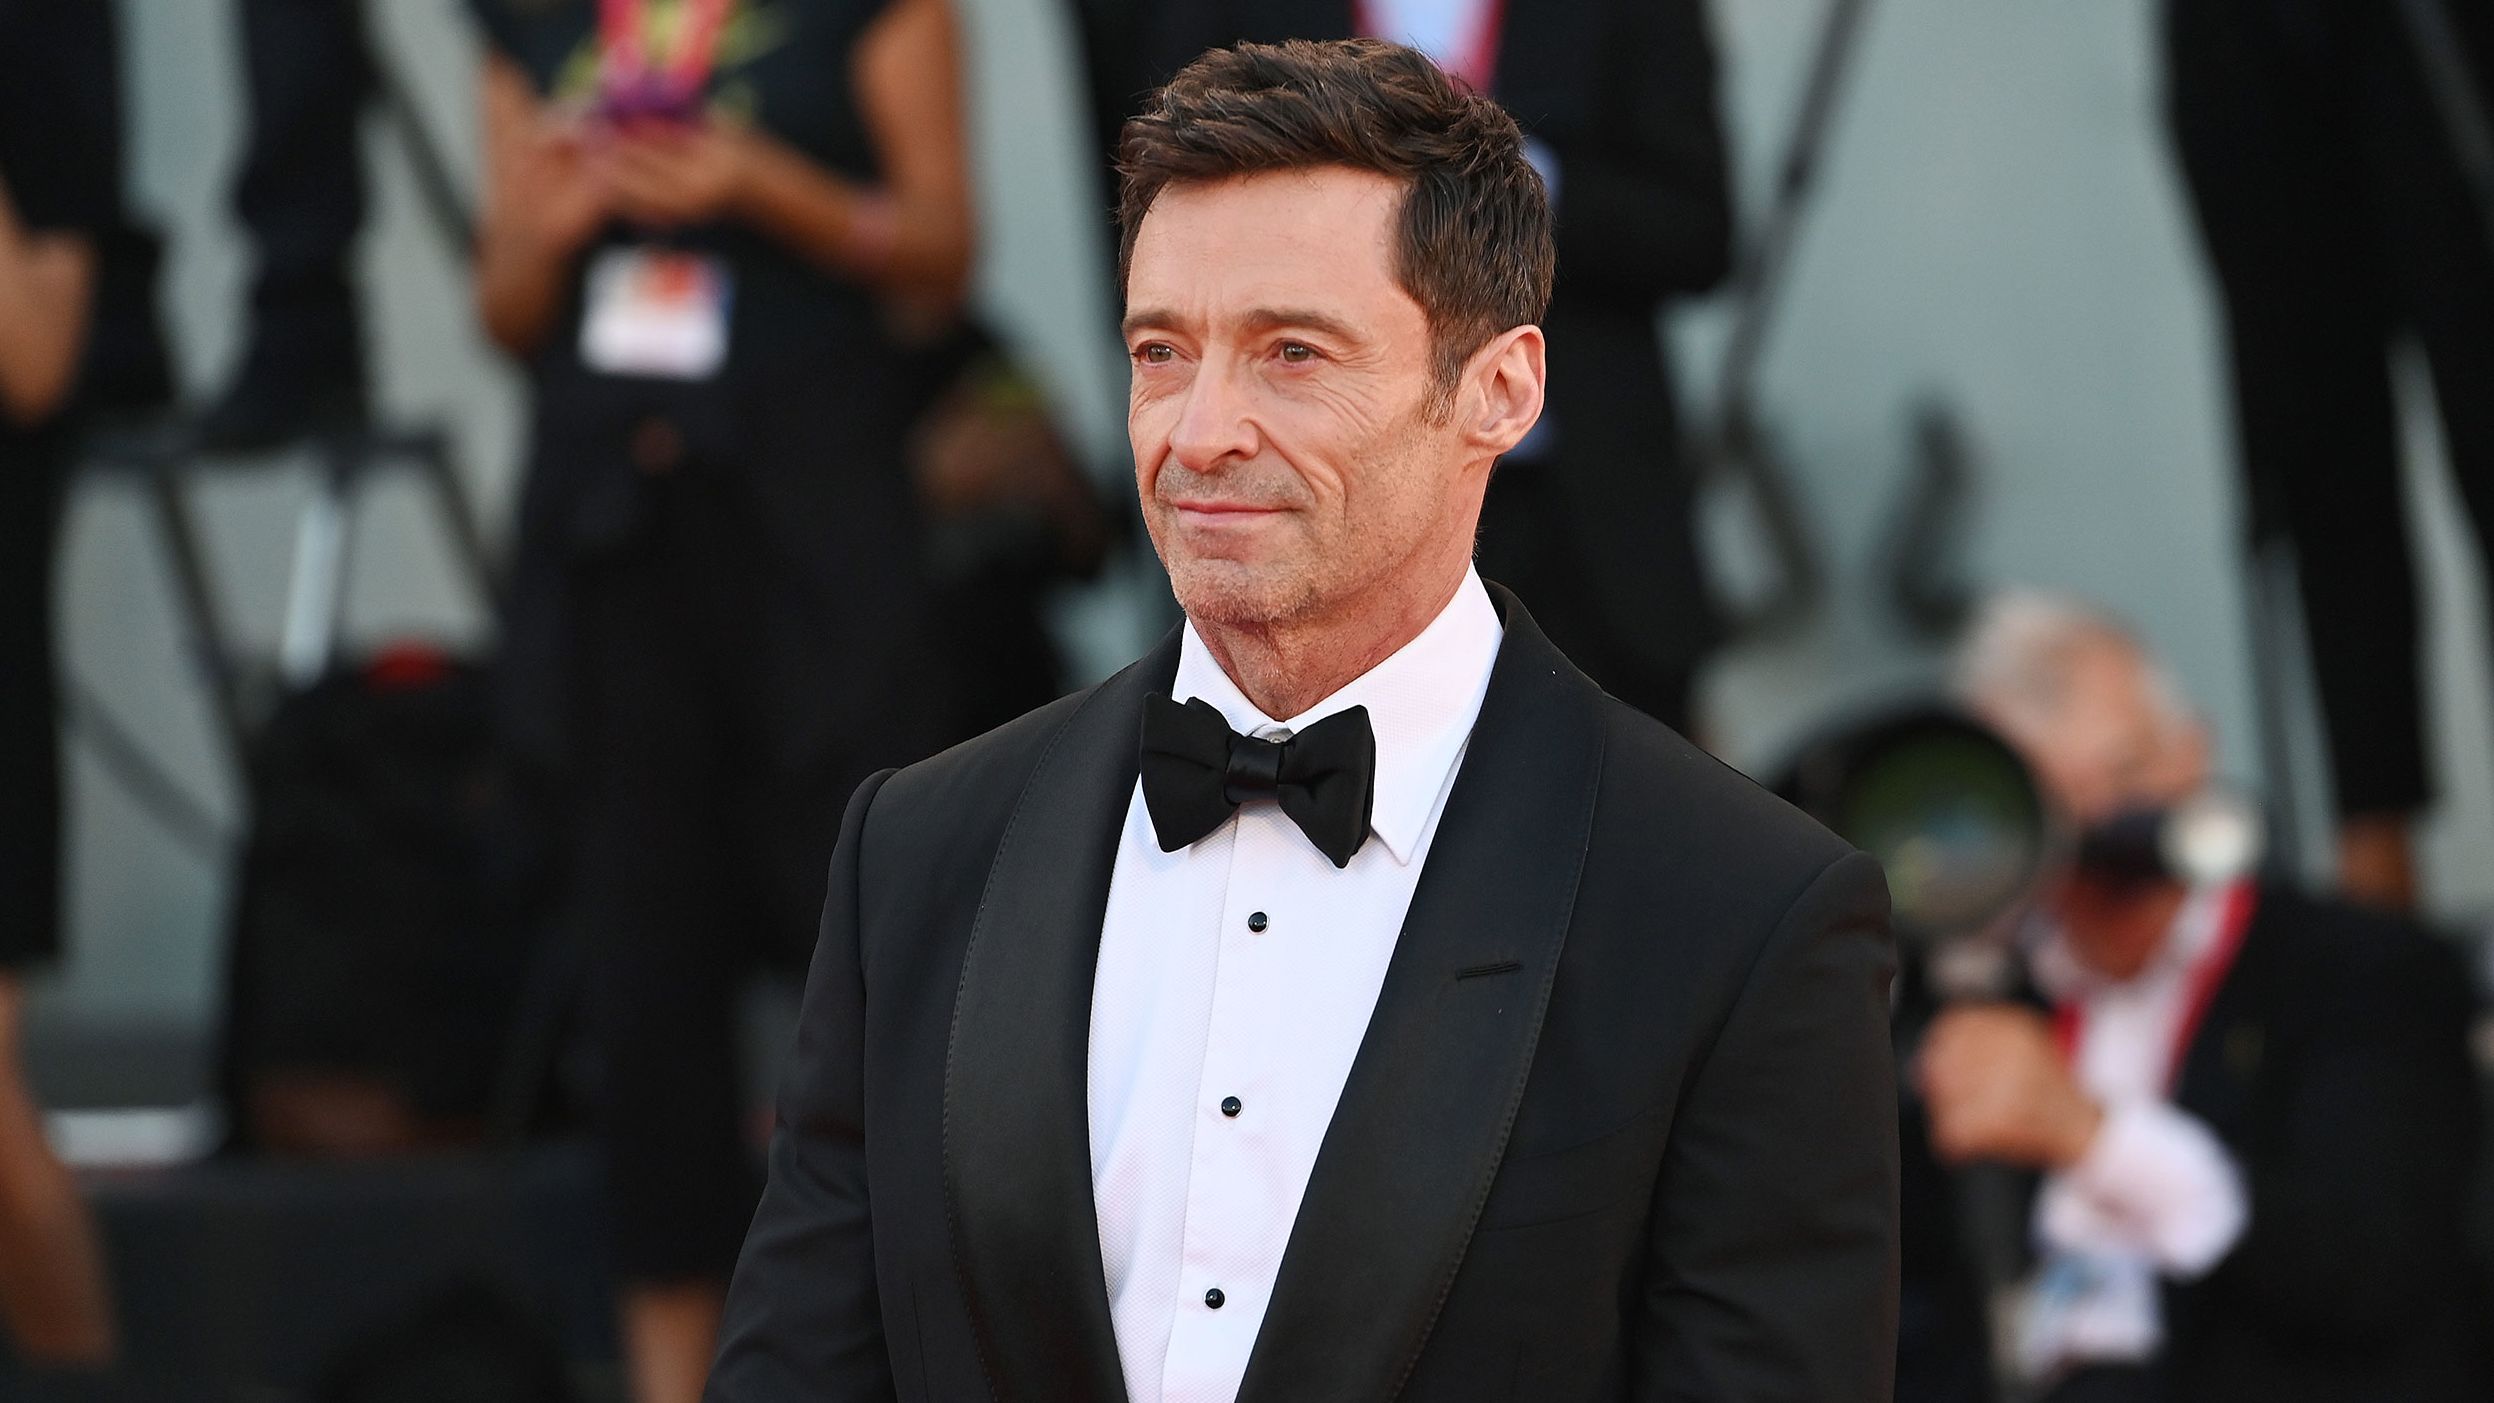 Hugh Jackman, seen here in September in Italy, is sharing details about "Deadpool 3."